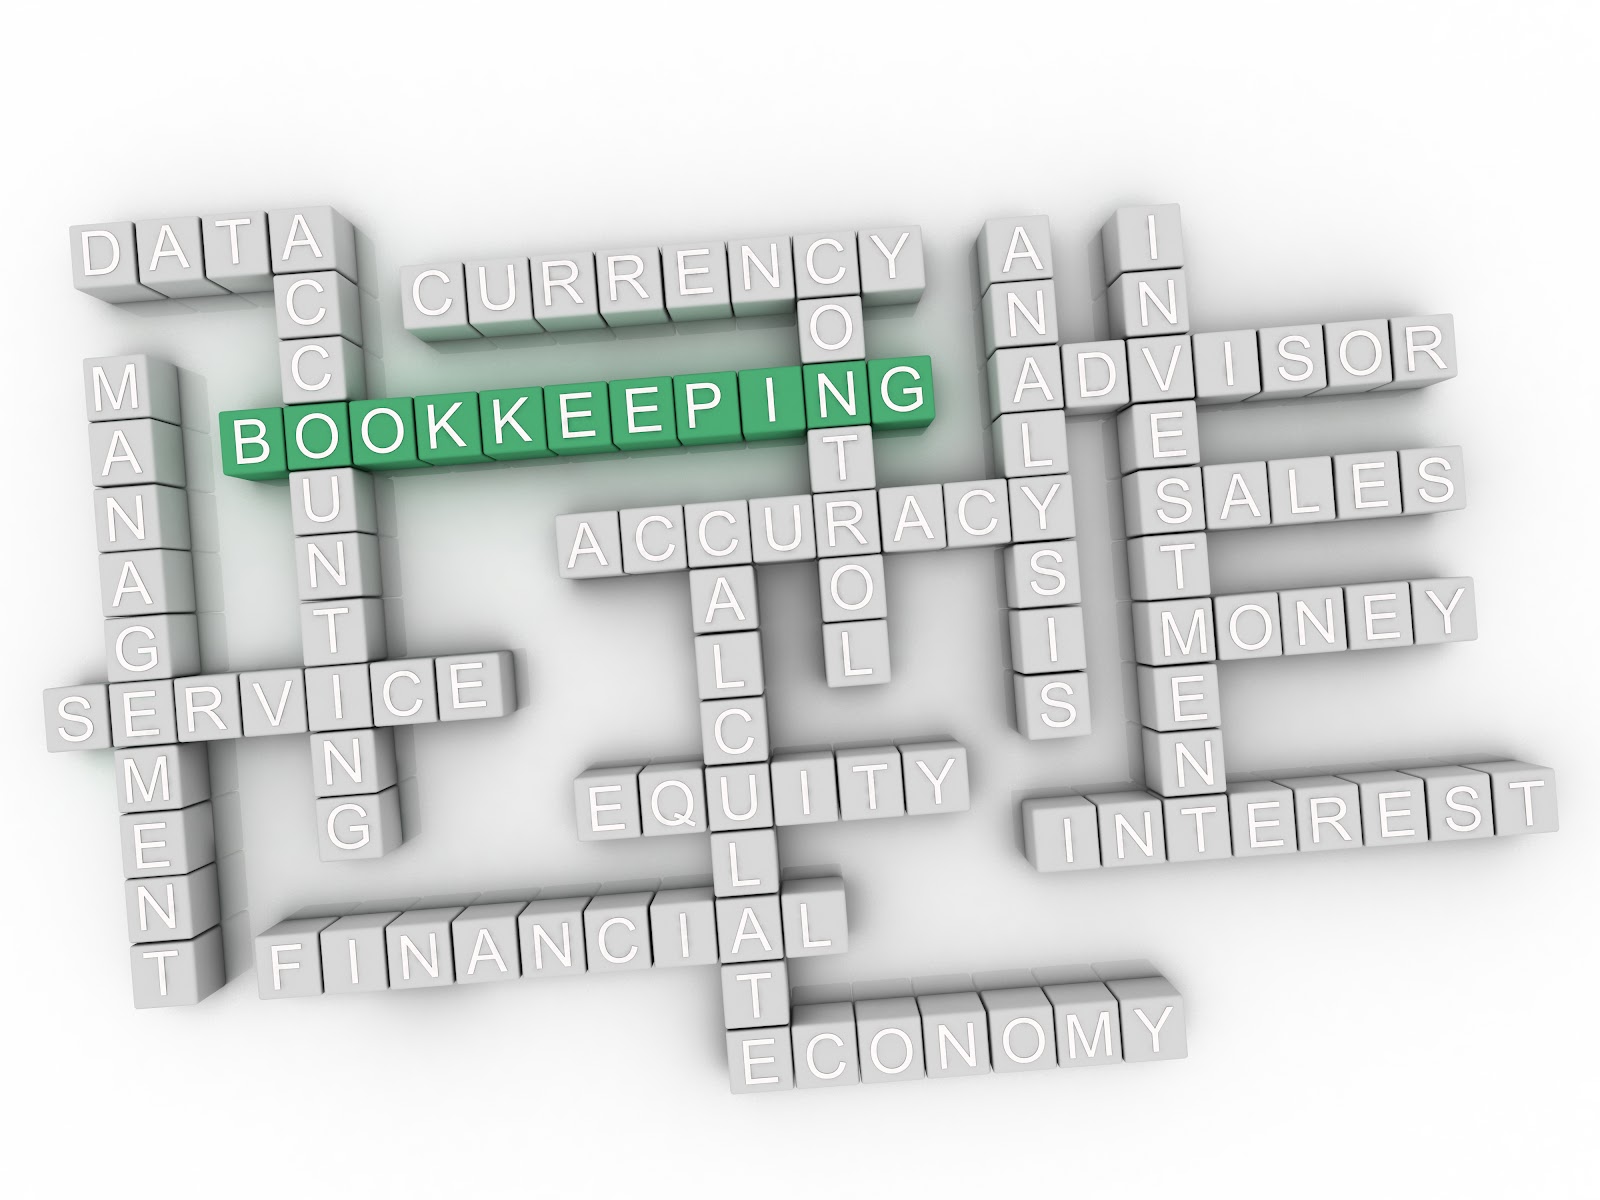 Bookkeeping for Independent Contractors and Small Businesses from The News Key at TheNewsKey.com